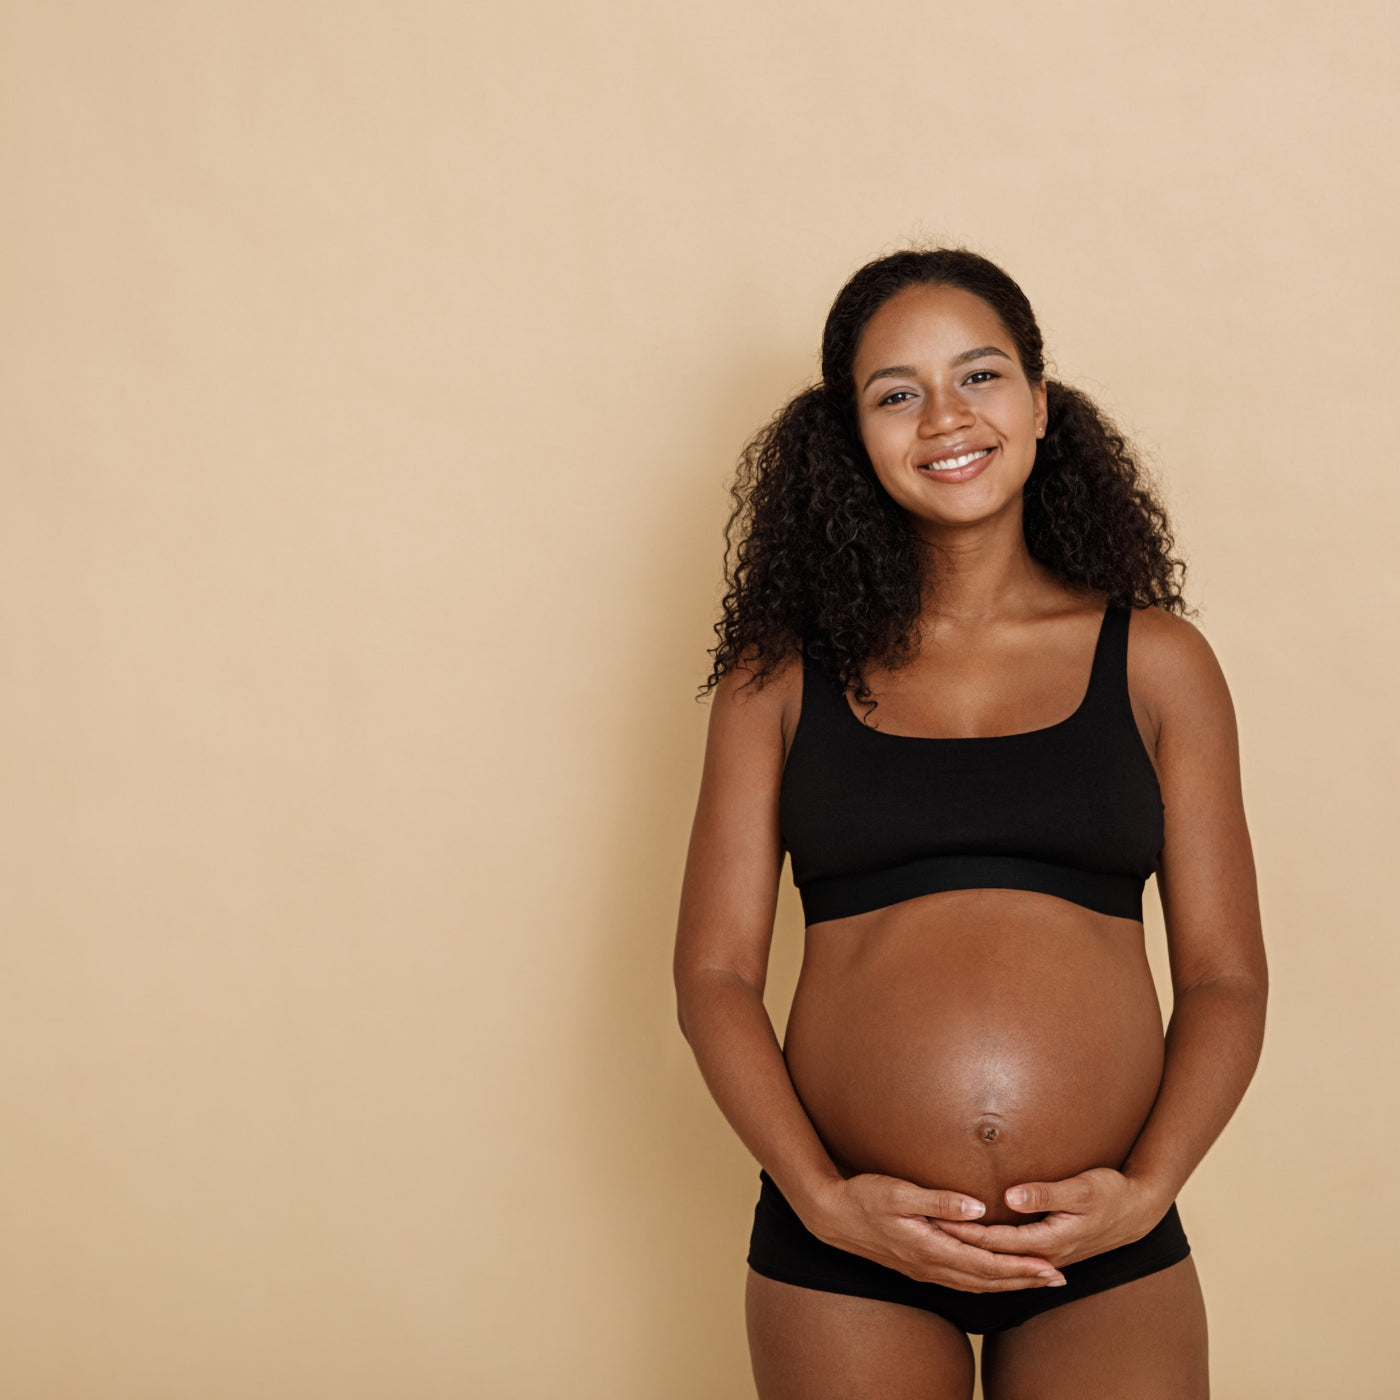 Skincare tips for pregnant mothers